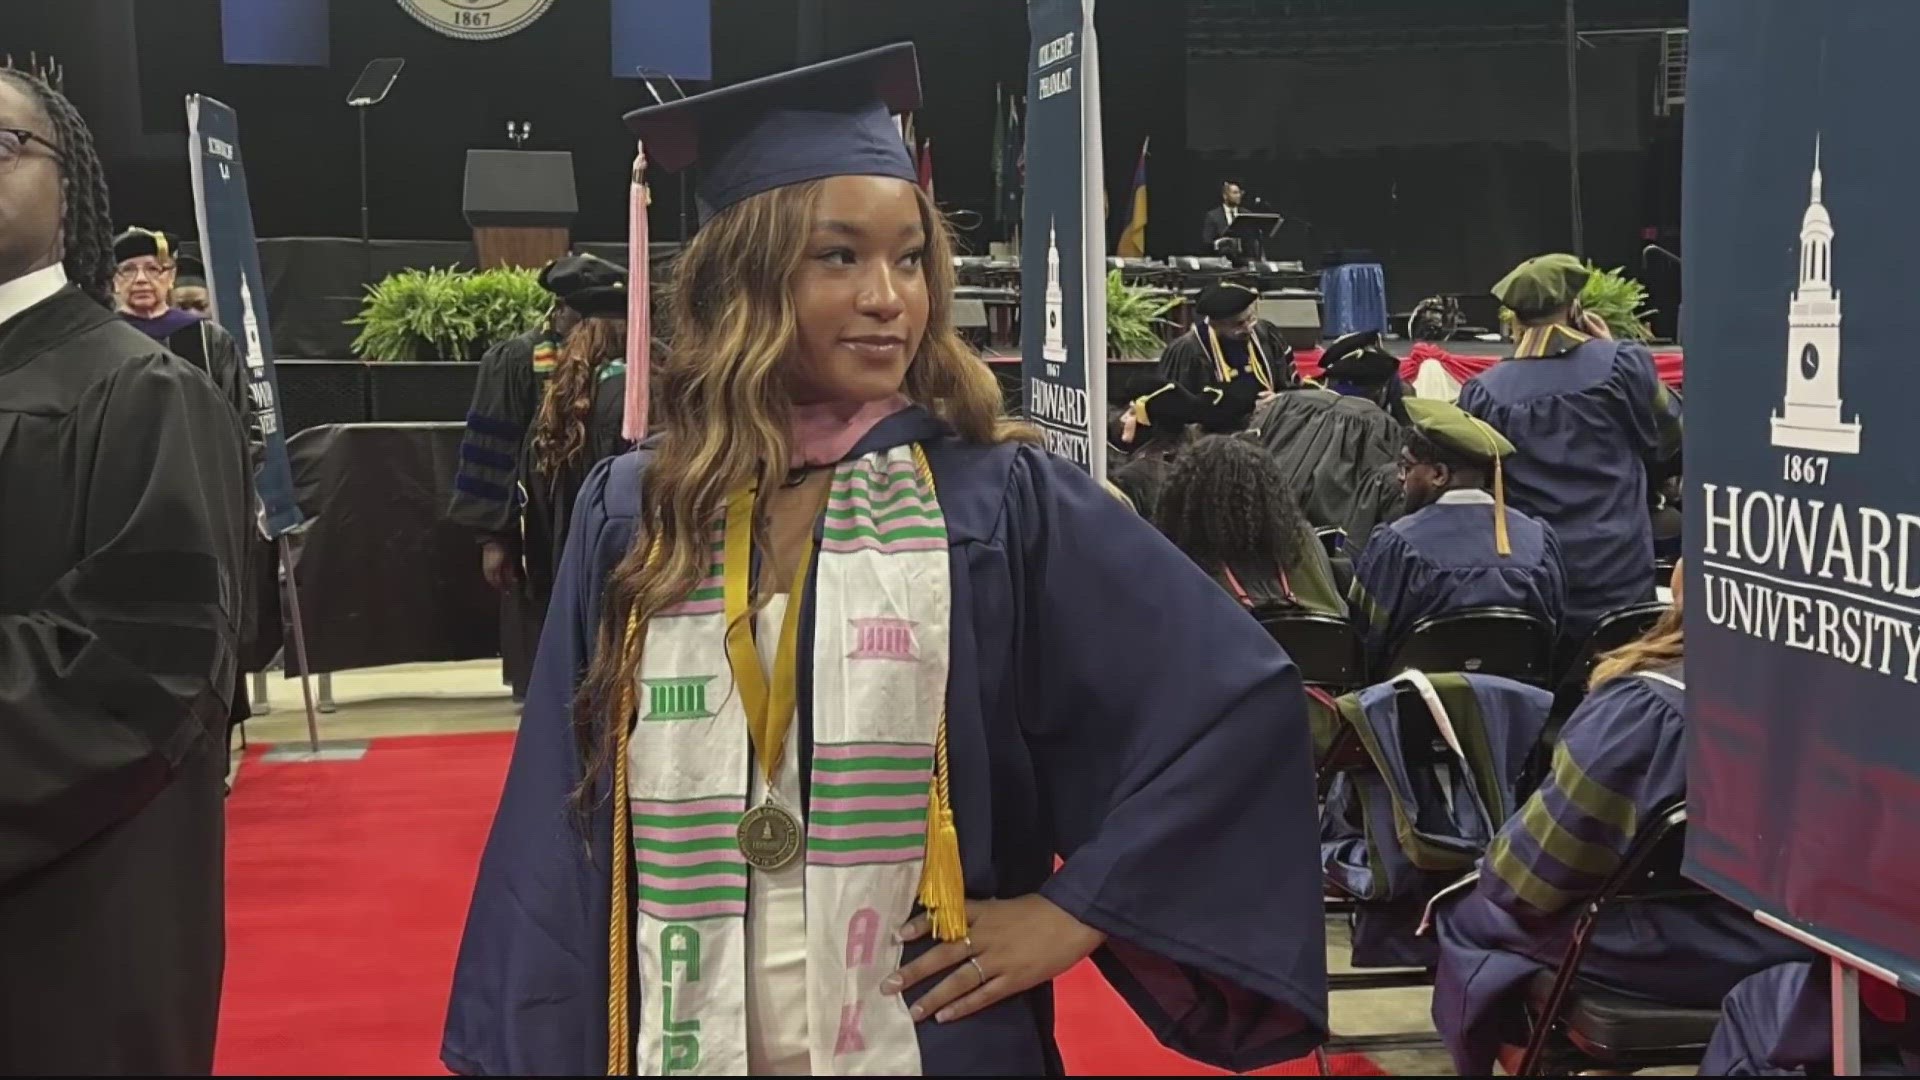 Margaret Johnson's school career was in a dire place, and then she found the Sallie Mae Fund